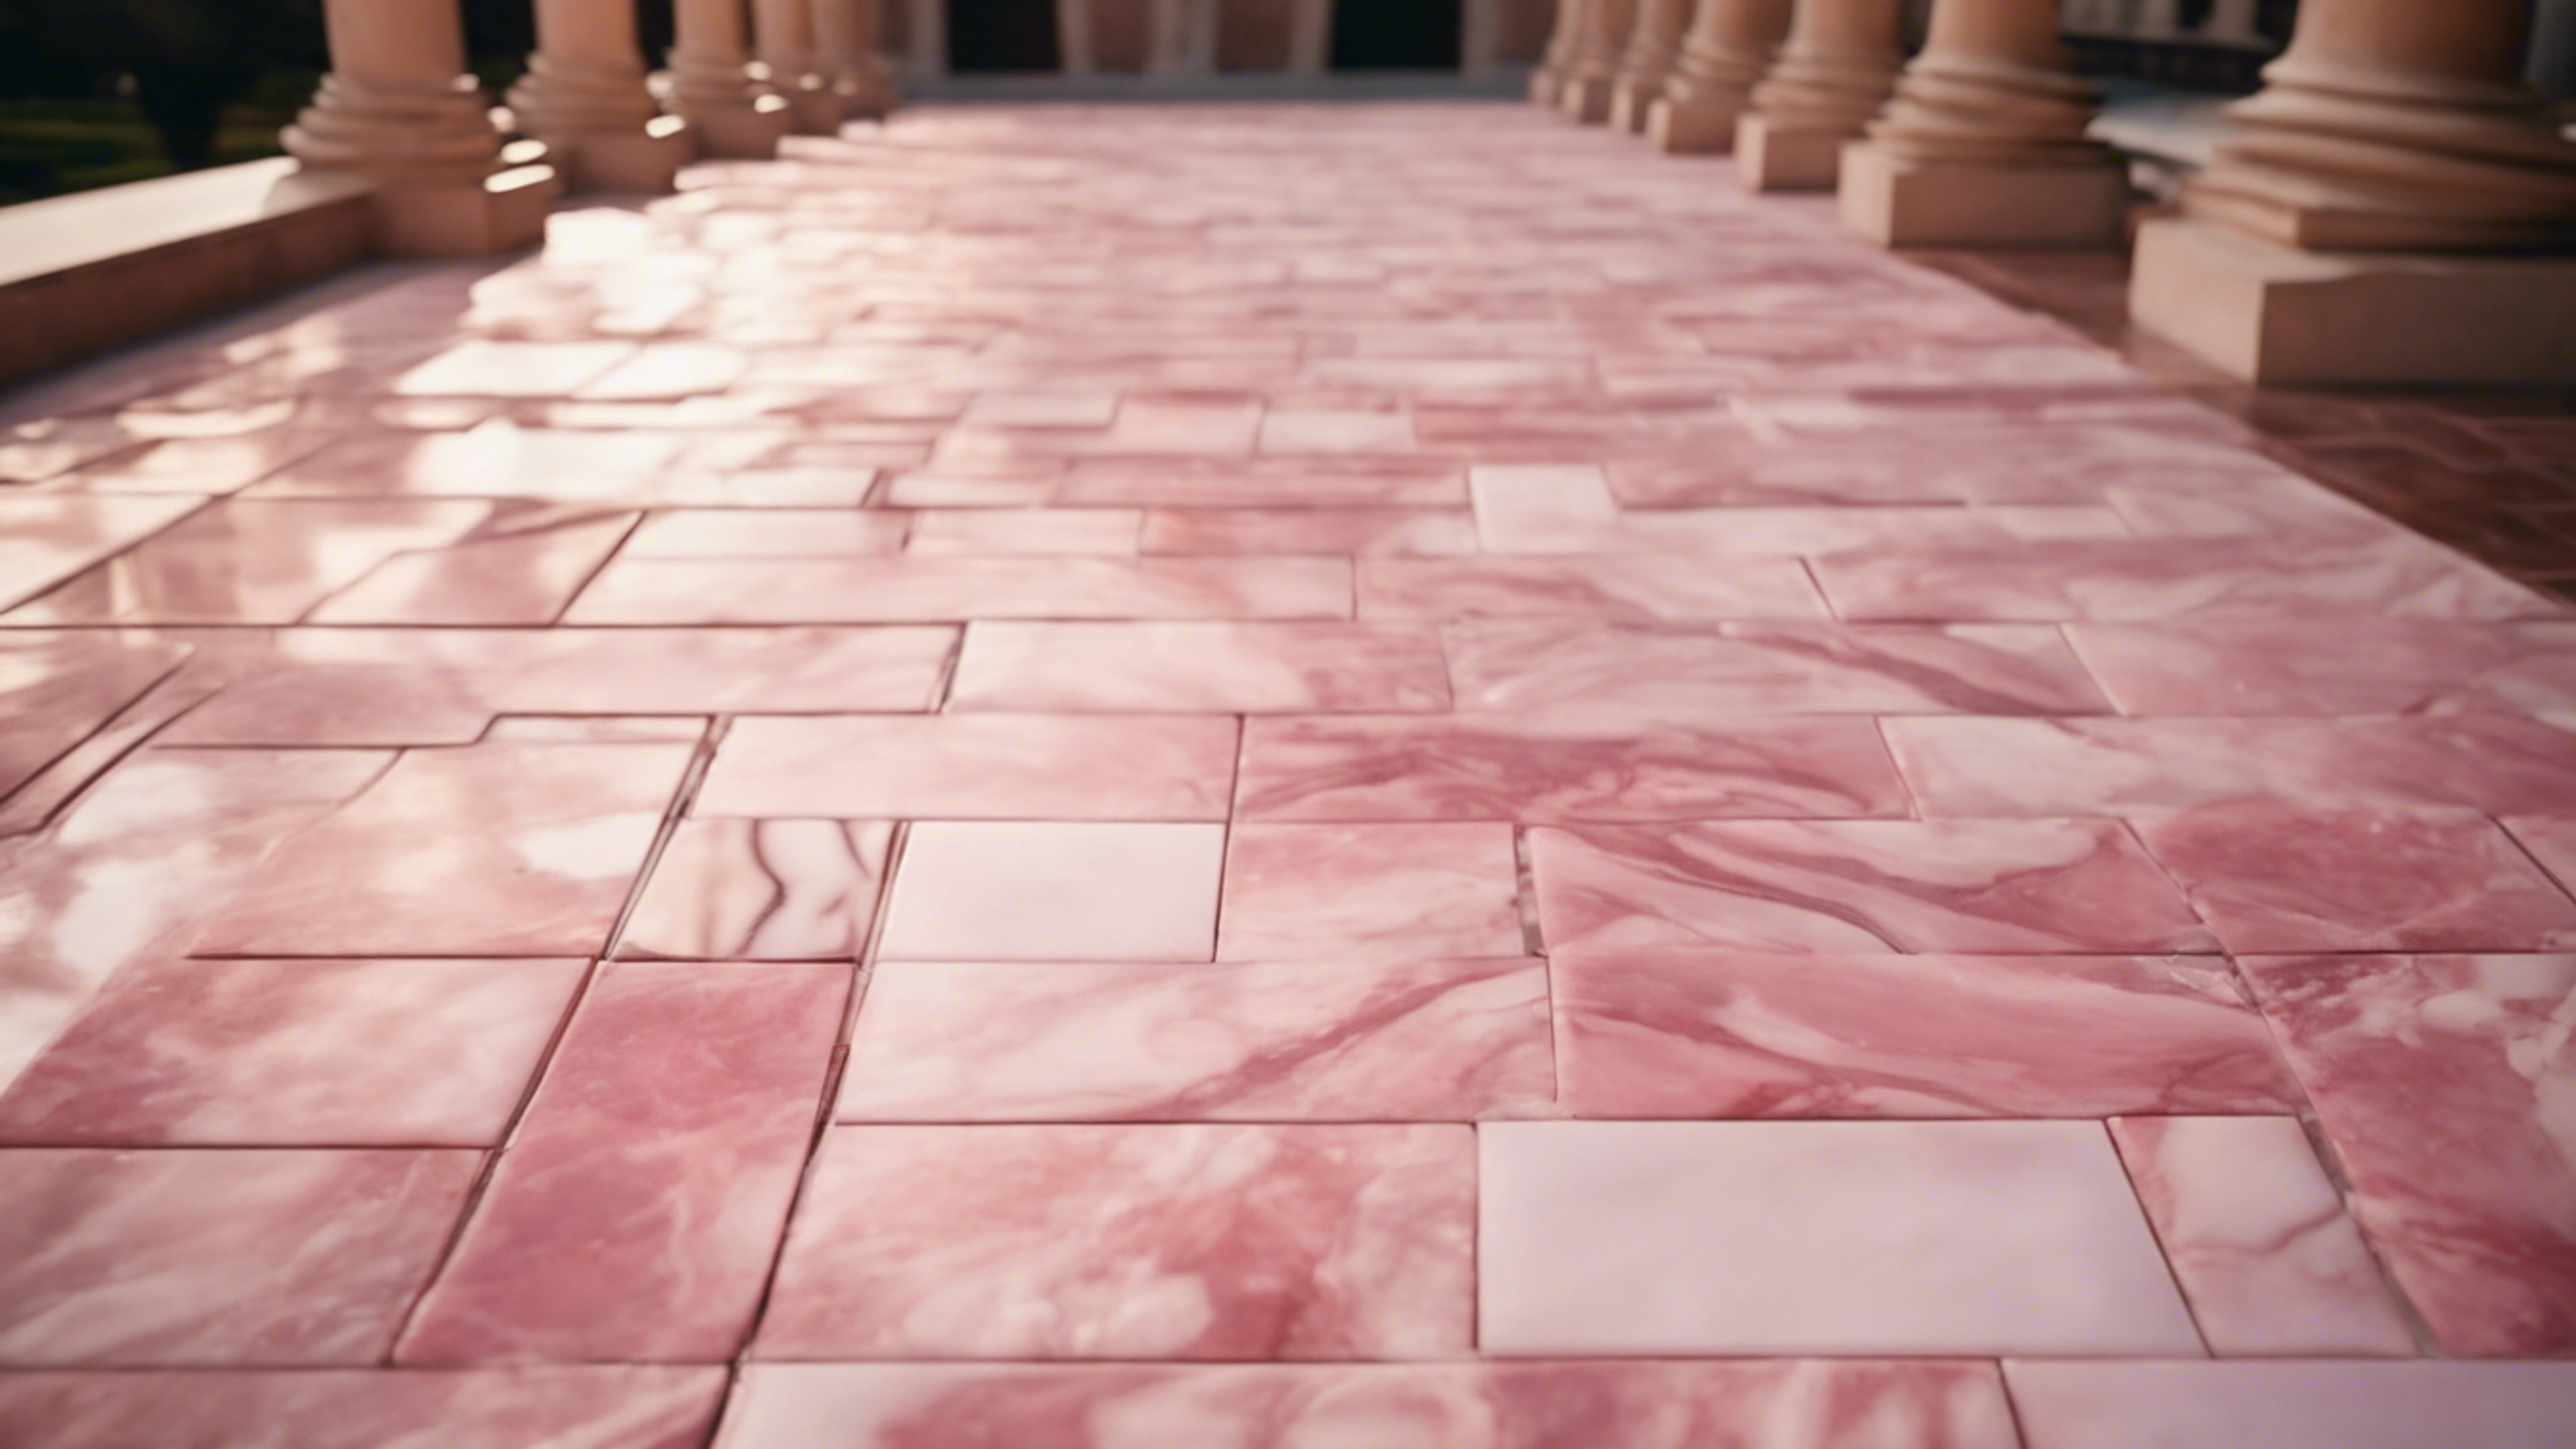 Sheets of pink marble laid down as a pathway in a lavish courtyard.壁紙[e576fda183b04be2be6f]